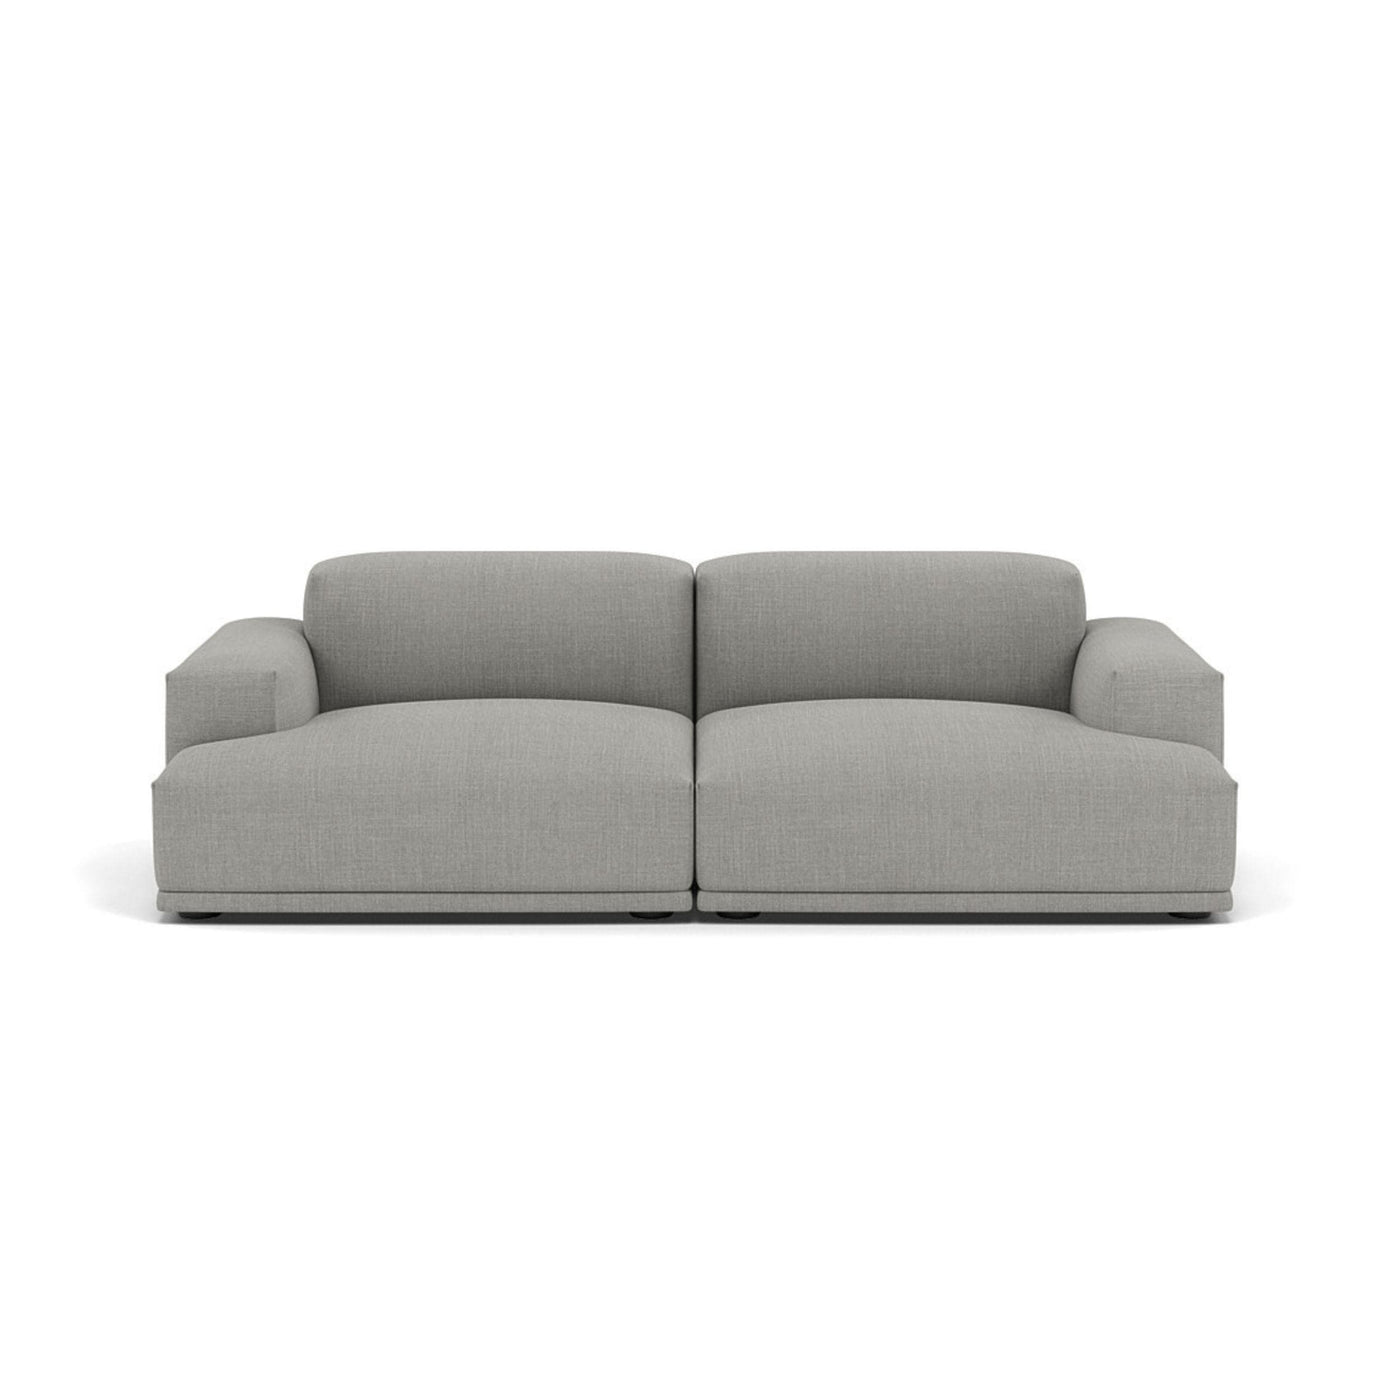 Muuto Connect Sofa 2 seater. Available made to order from someday designs. #colour_remix-133